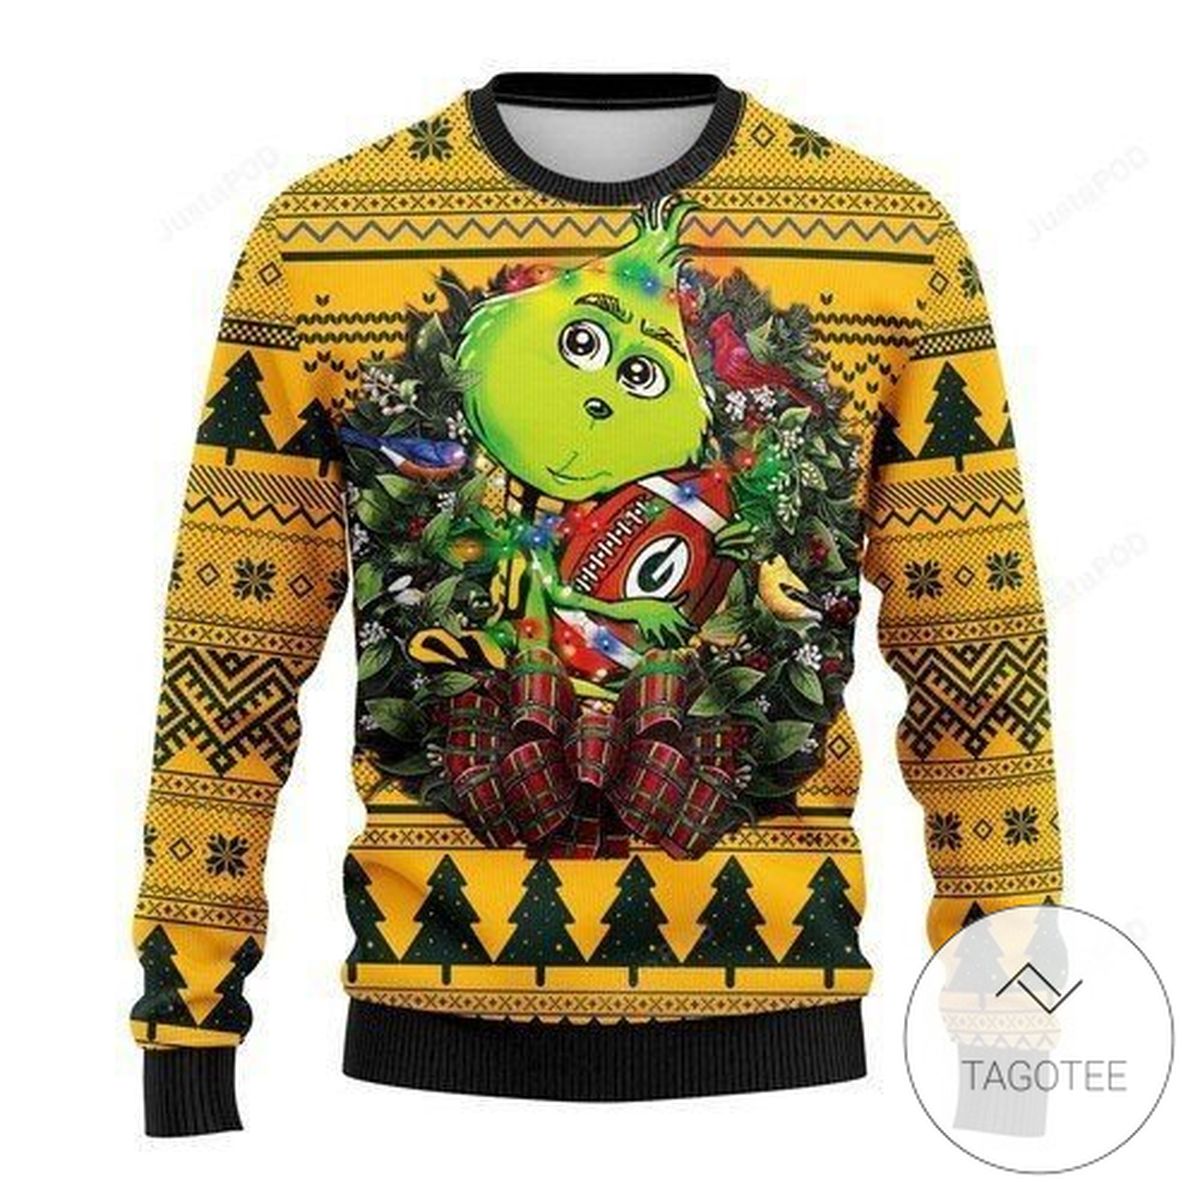 Nfl Green Bay Packers Grinch Hug Sweatshirt Knitted Ugly Christmas Sweater